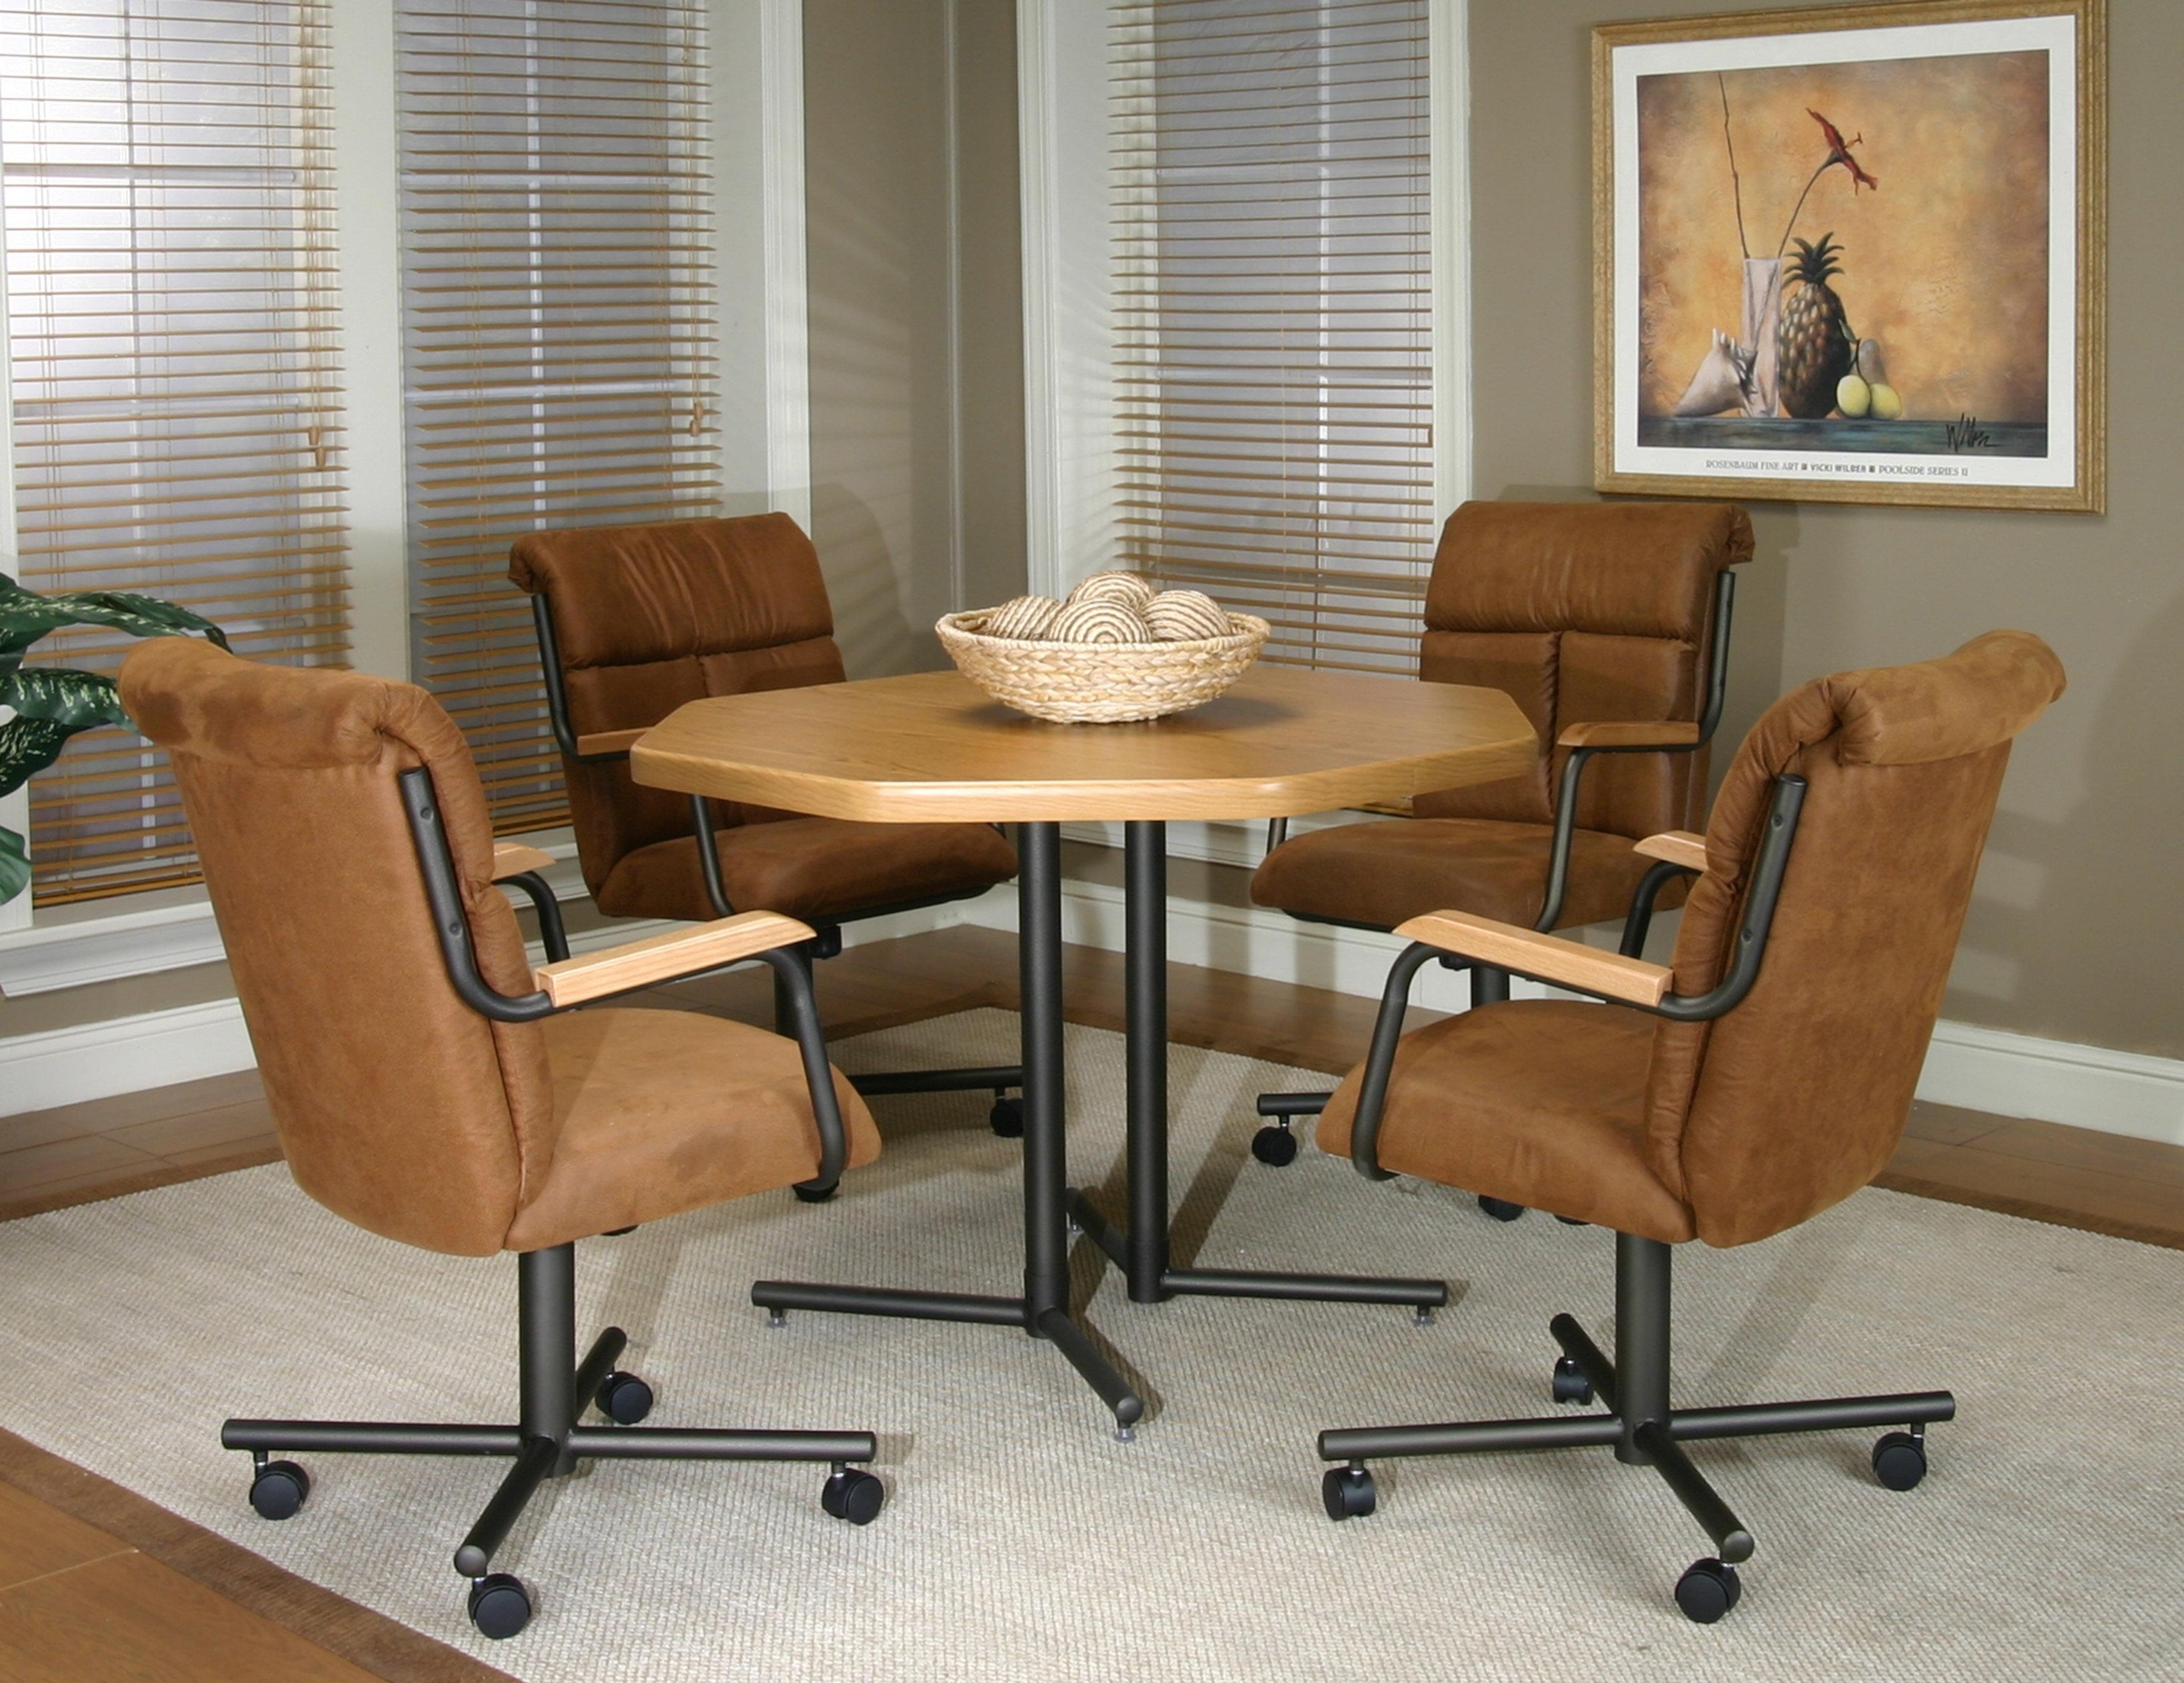 Dining Chairs With Casters You Ll Love, Leather Dining Room Chairs With Wheels